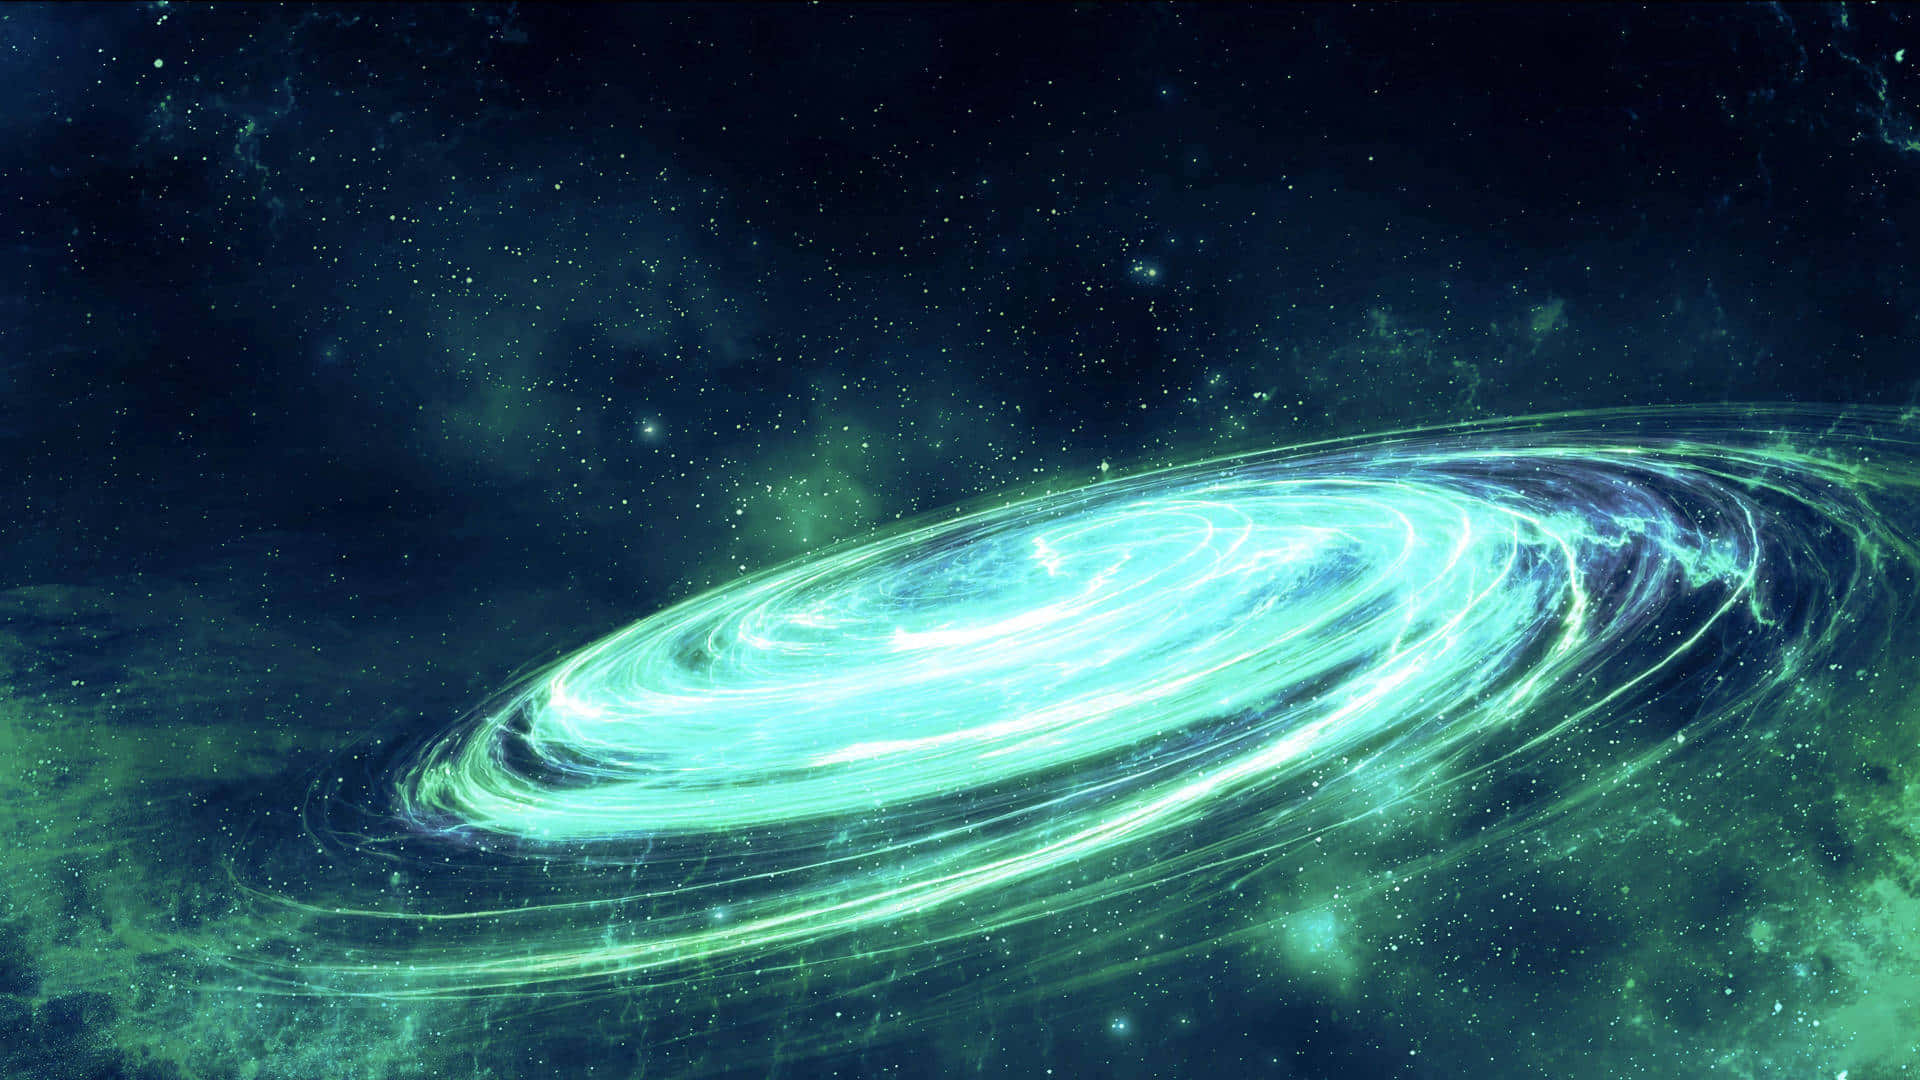 Exploring the possibilities of the Green Galaxy Wallpaper